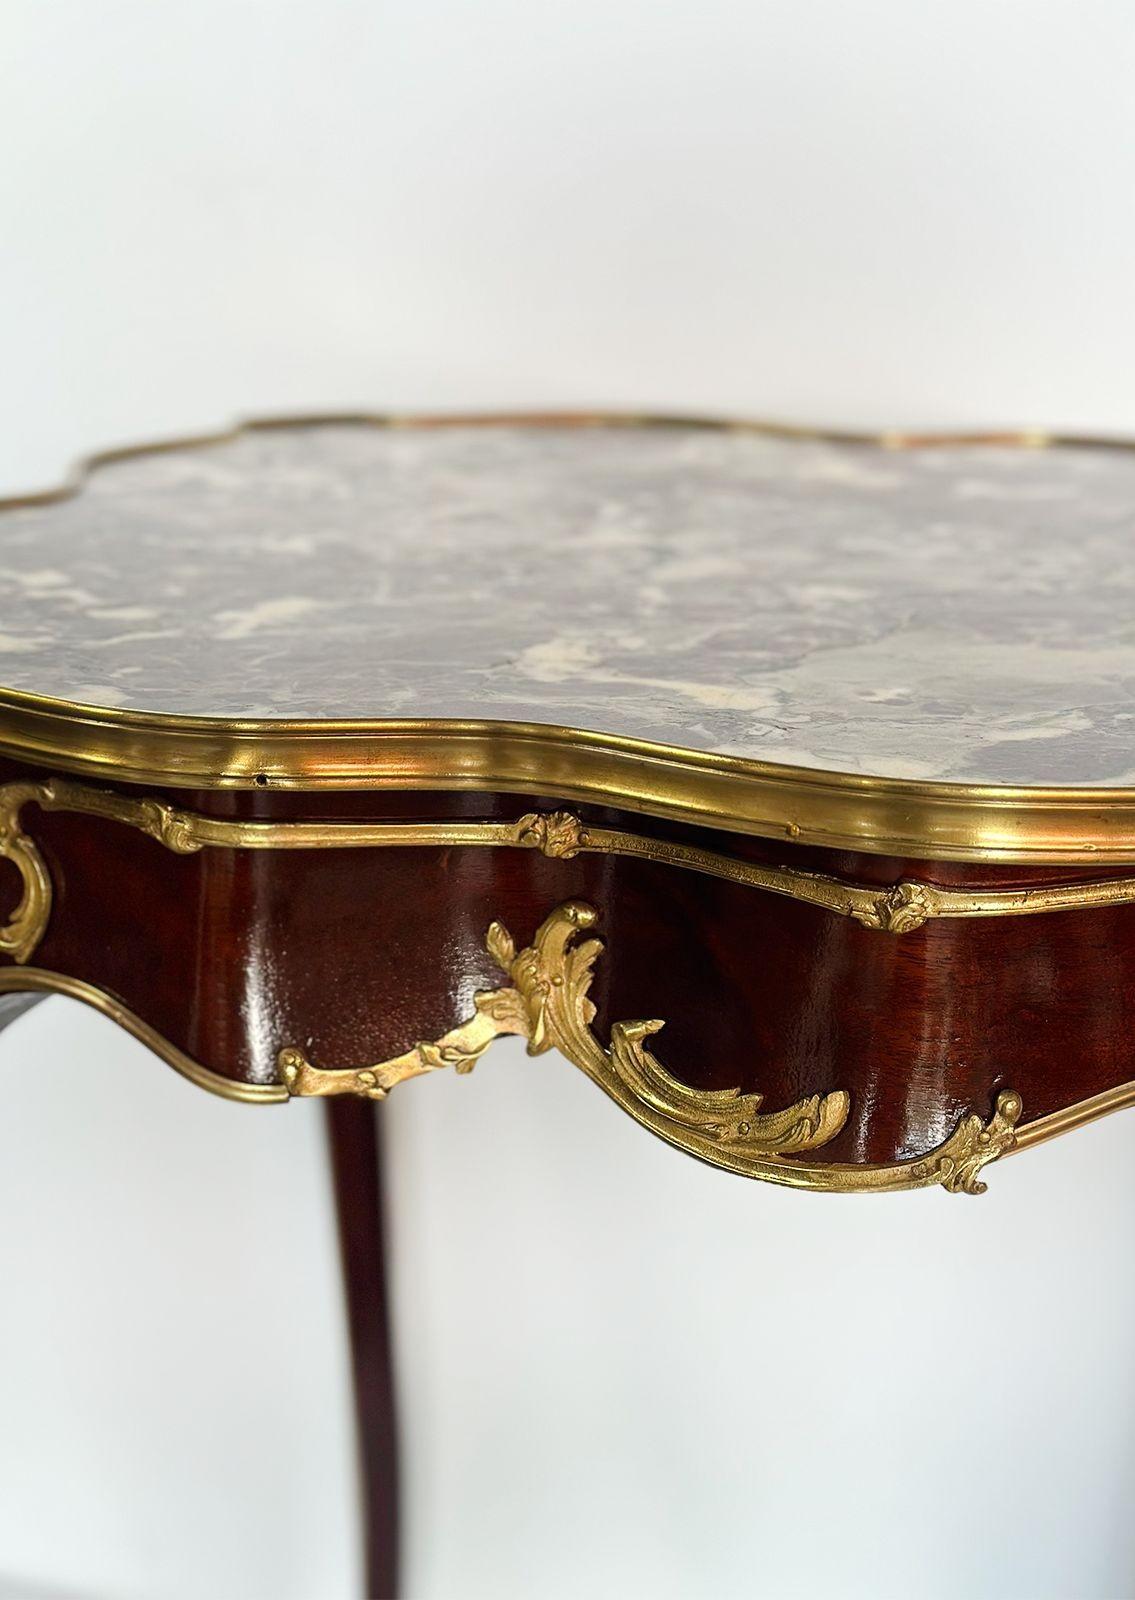 Majestic wood side or occasional table made in France in the Late 19th Century, consisting of a beautiful purple breccia marble top with a unique figure and figural bronze foliate motif and portrait mounts surrounding the piece. The table also